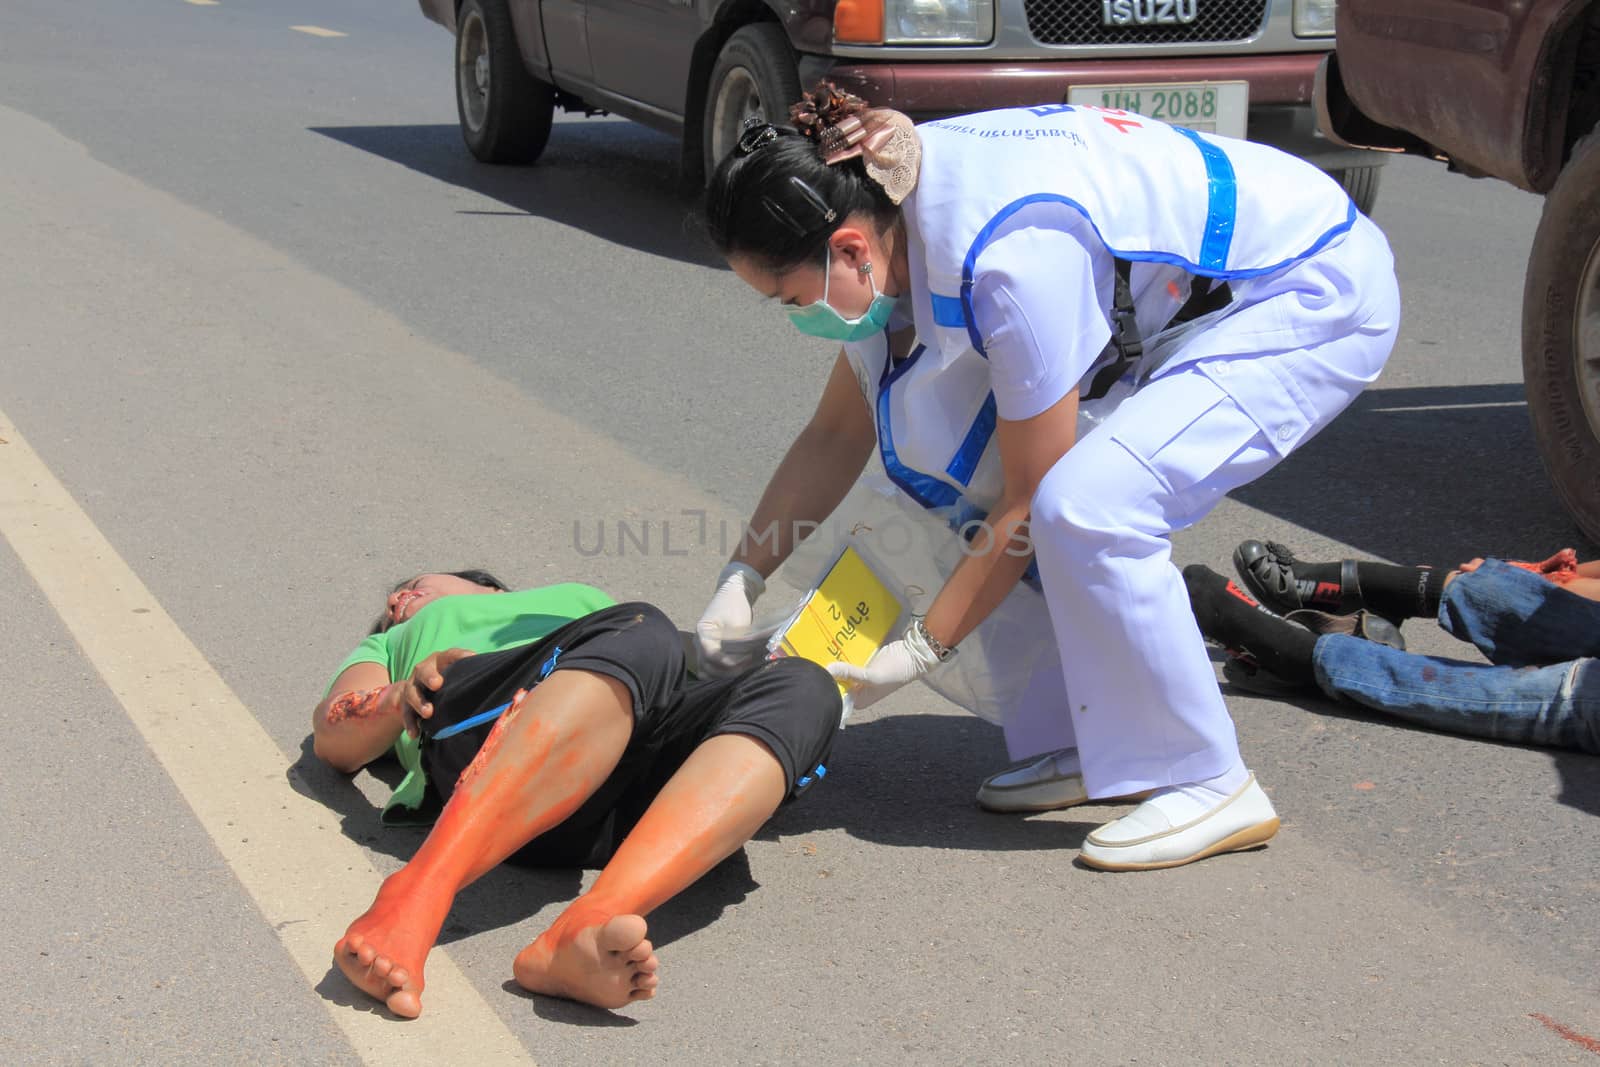 SURAT THANI, THAILAND - OCTOBER 4 : Practicing fire protection plan and rescue car accident on October 4, 2012 in Surat Thani, Thailand.